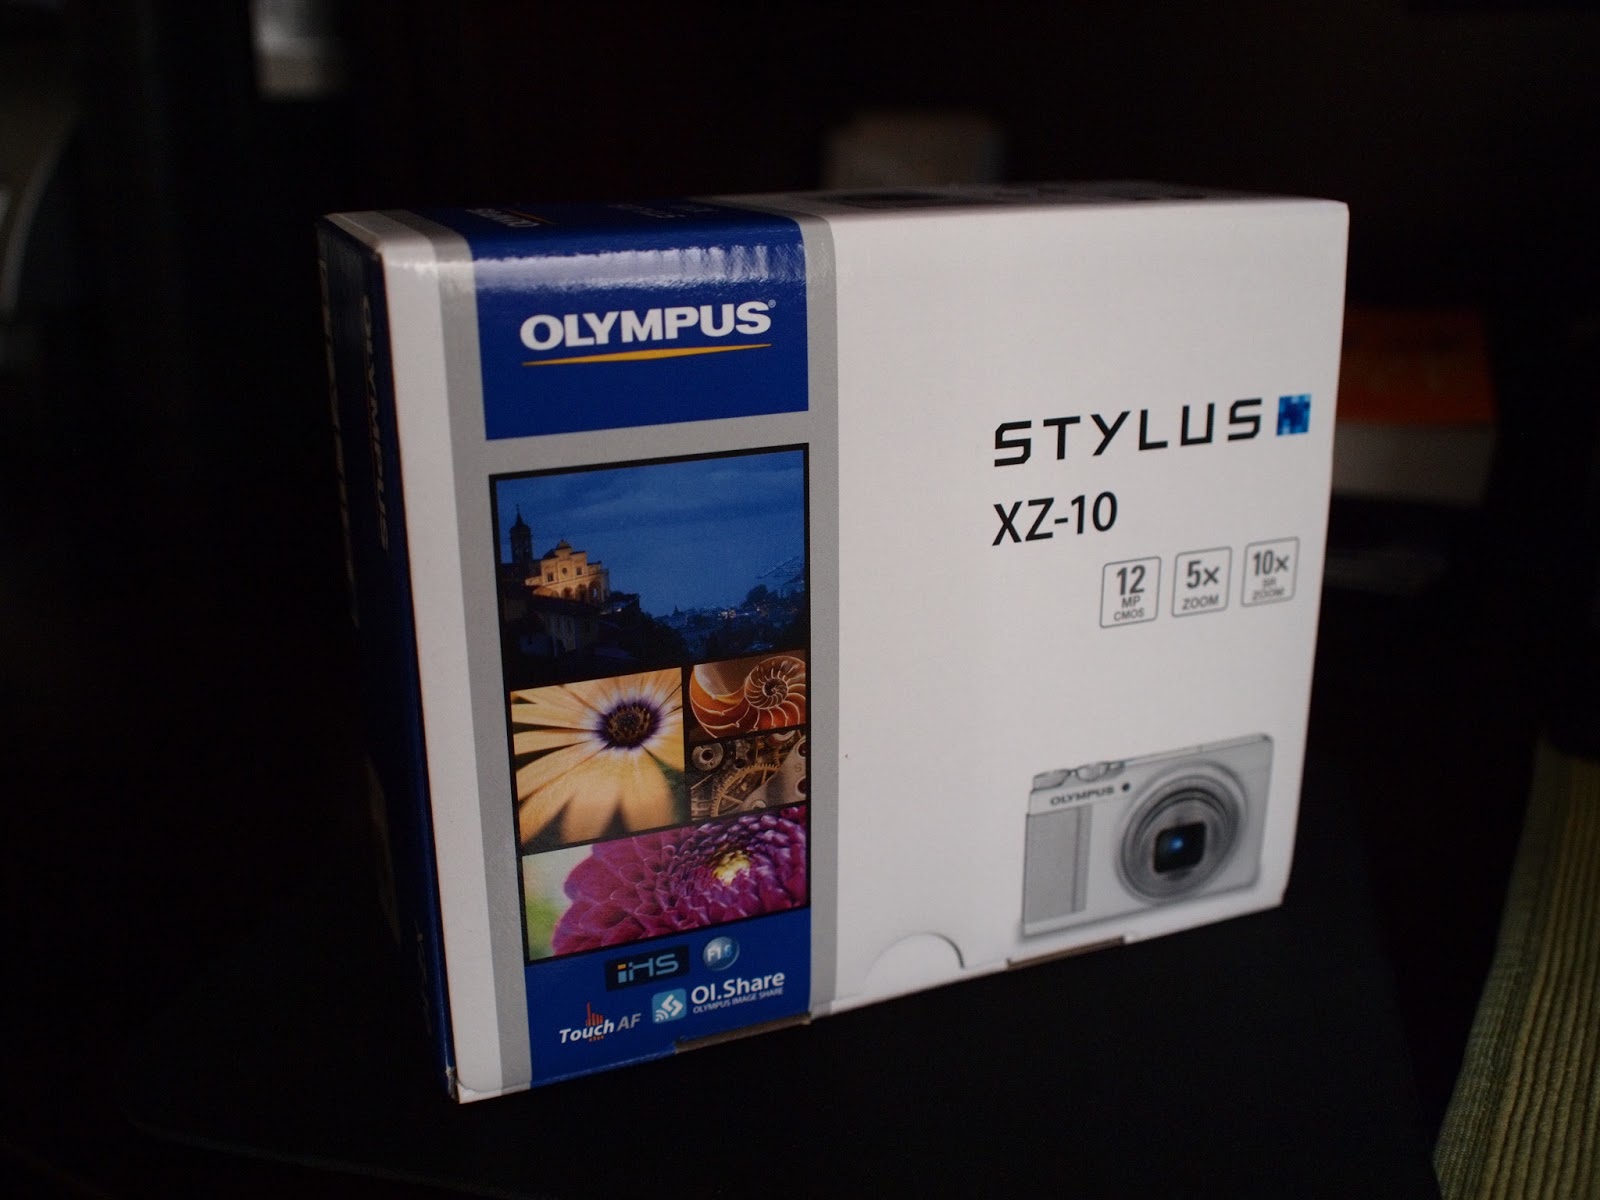 PHOTOGRAPHIC CENTRAL: Olympus Stylus XZ-10- In For Review!